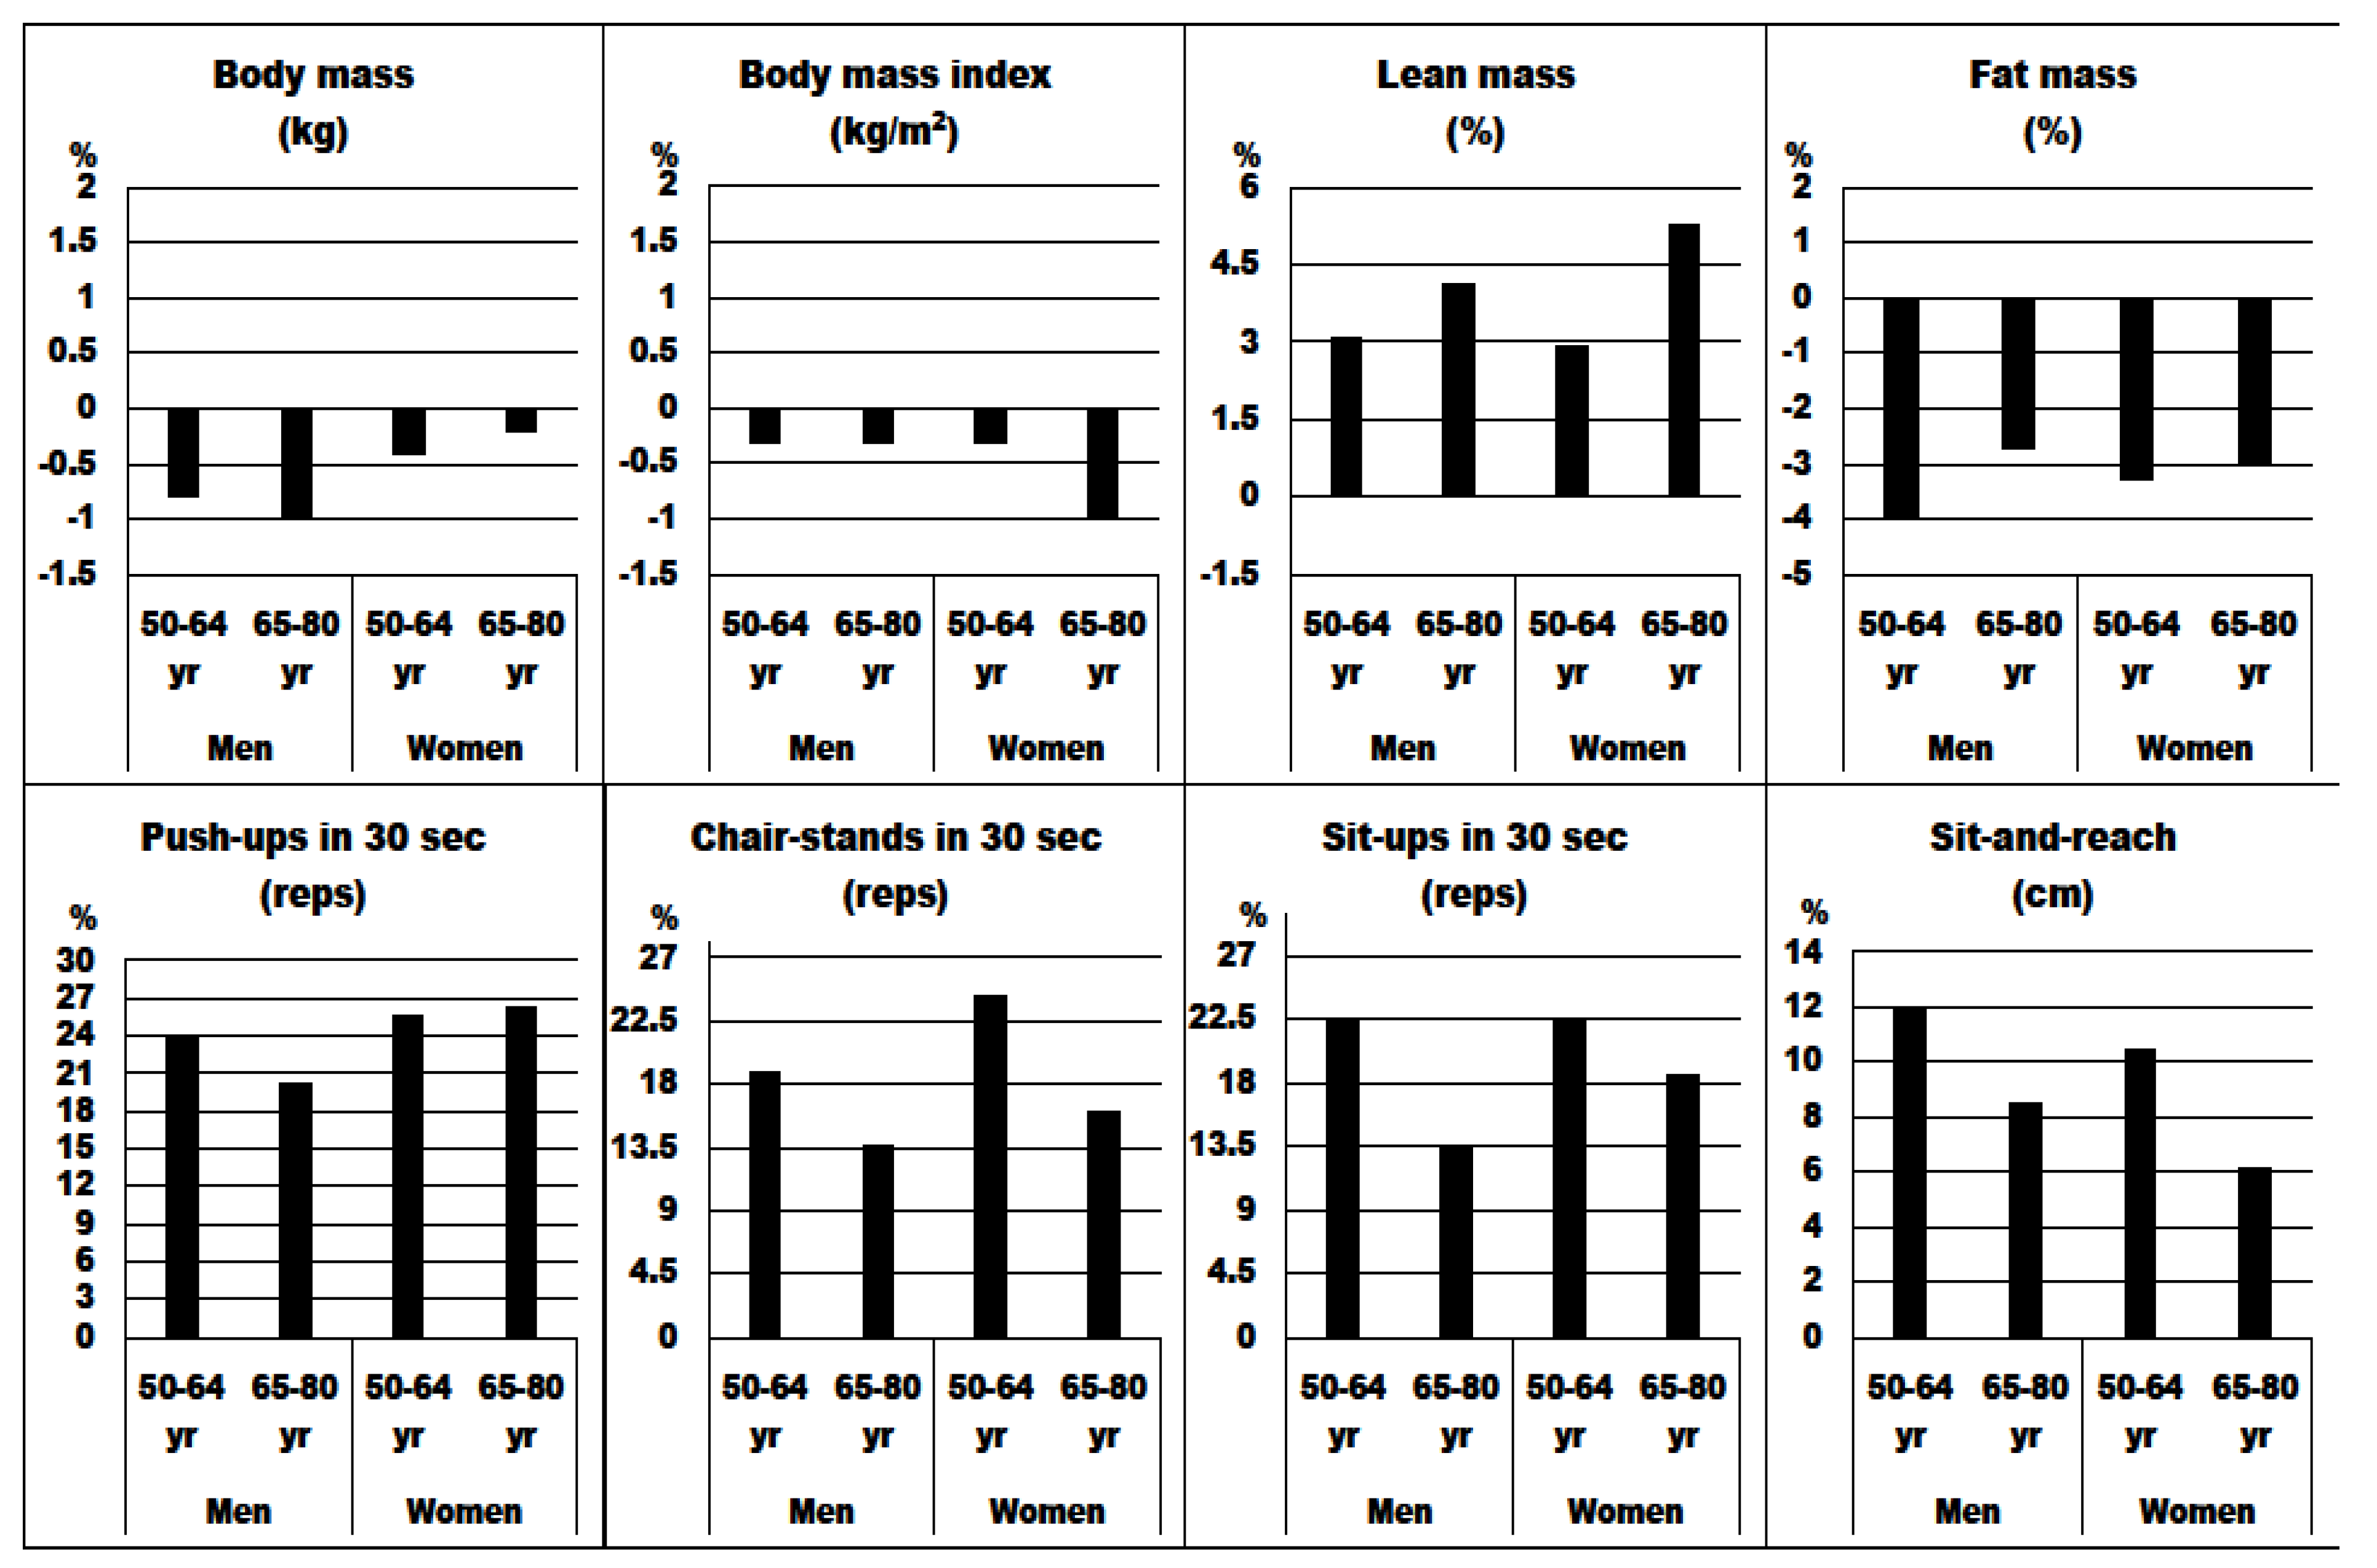 Body Composition and Flexibility 